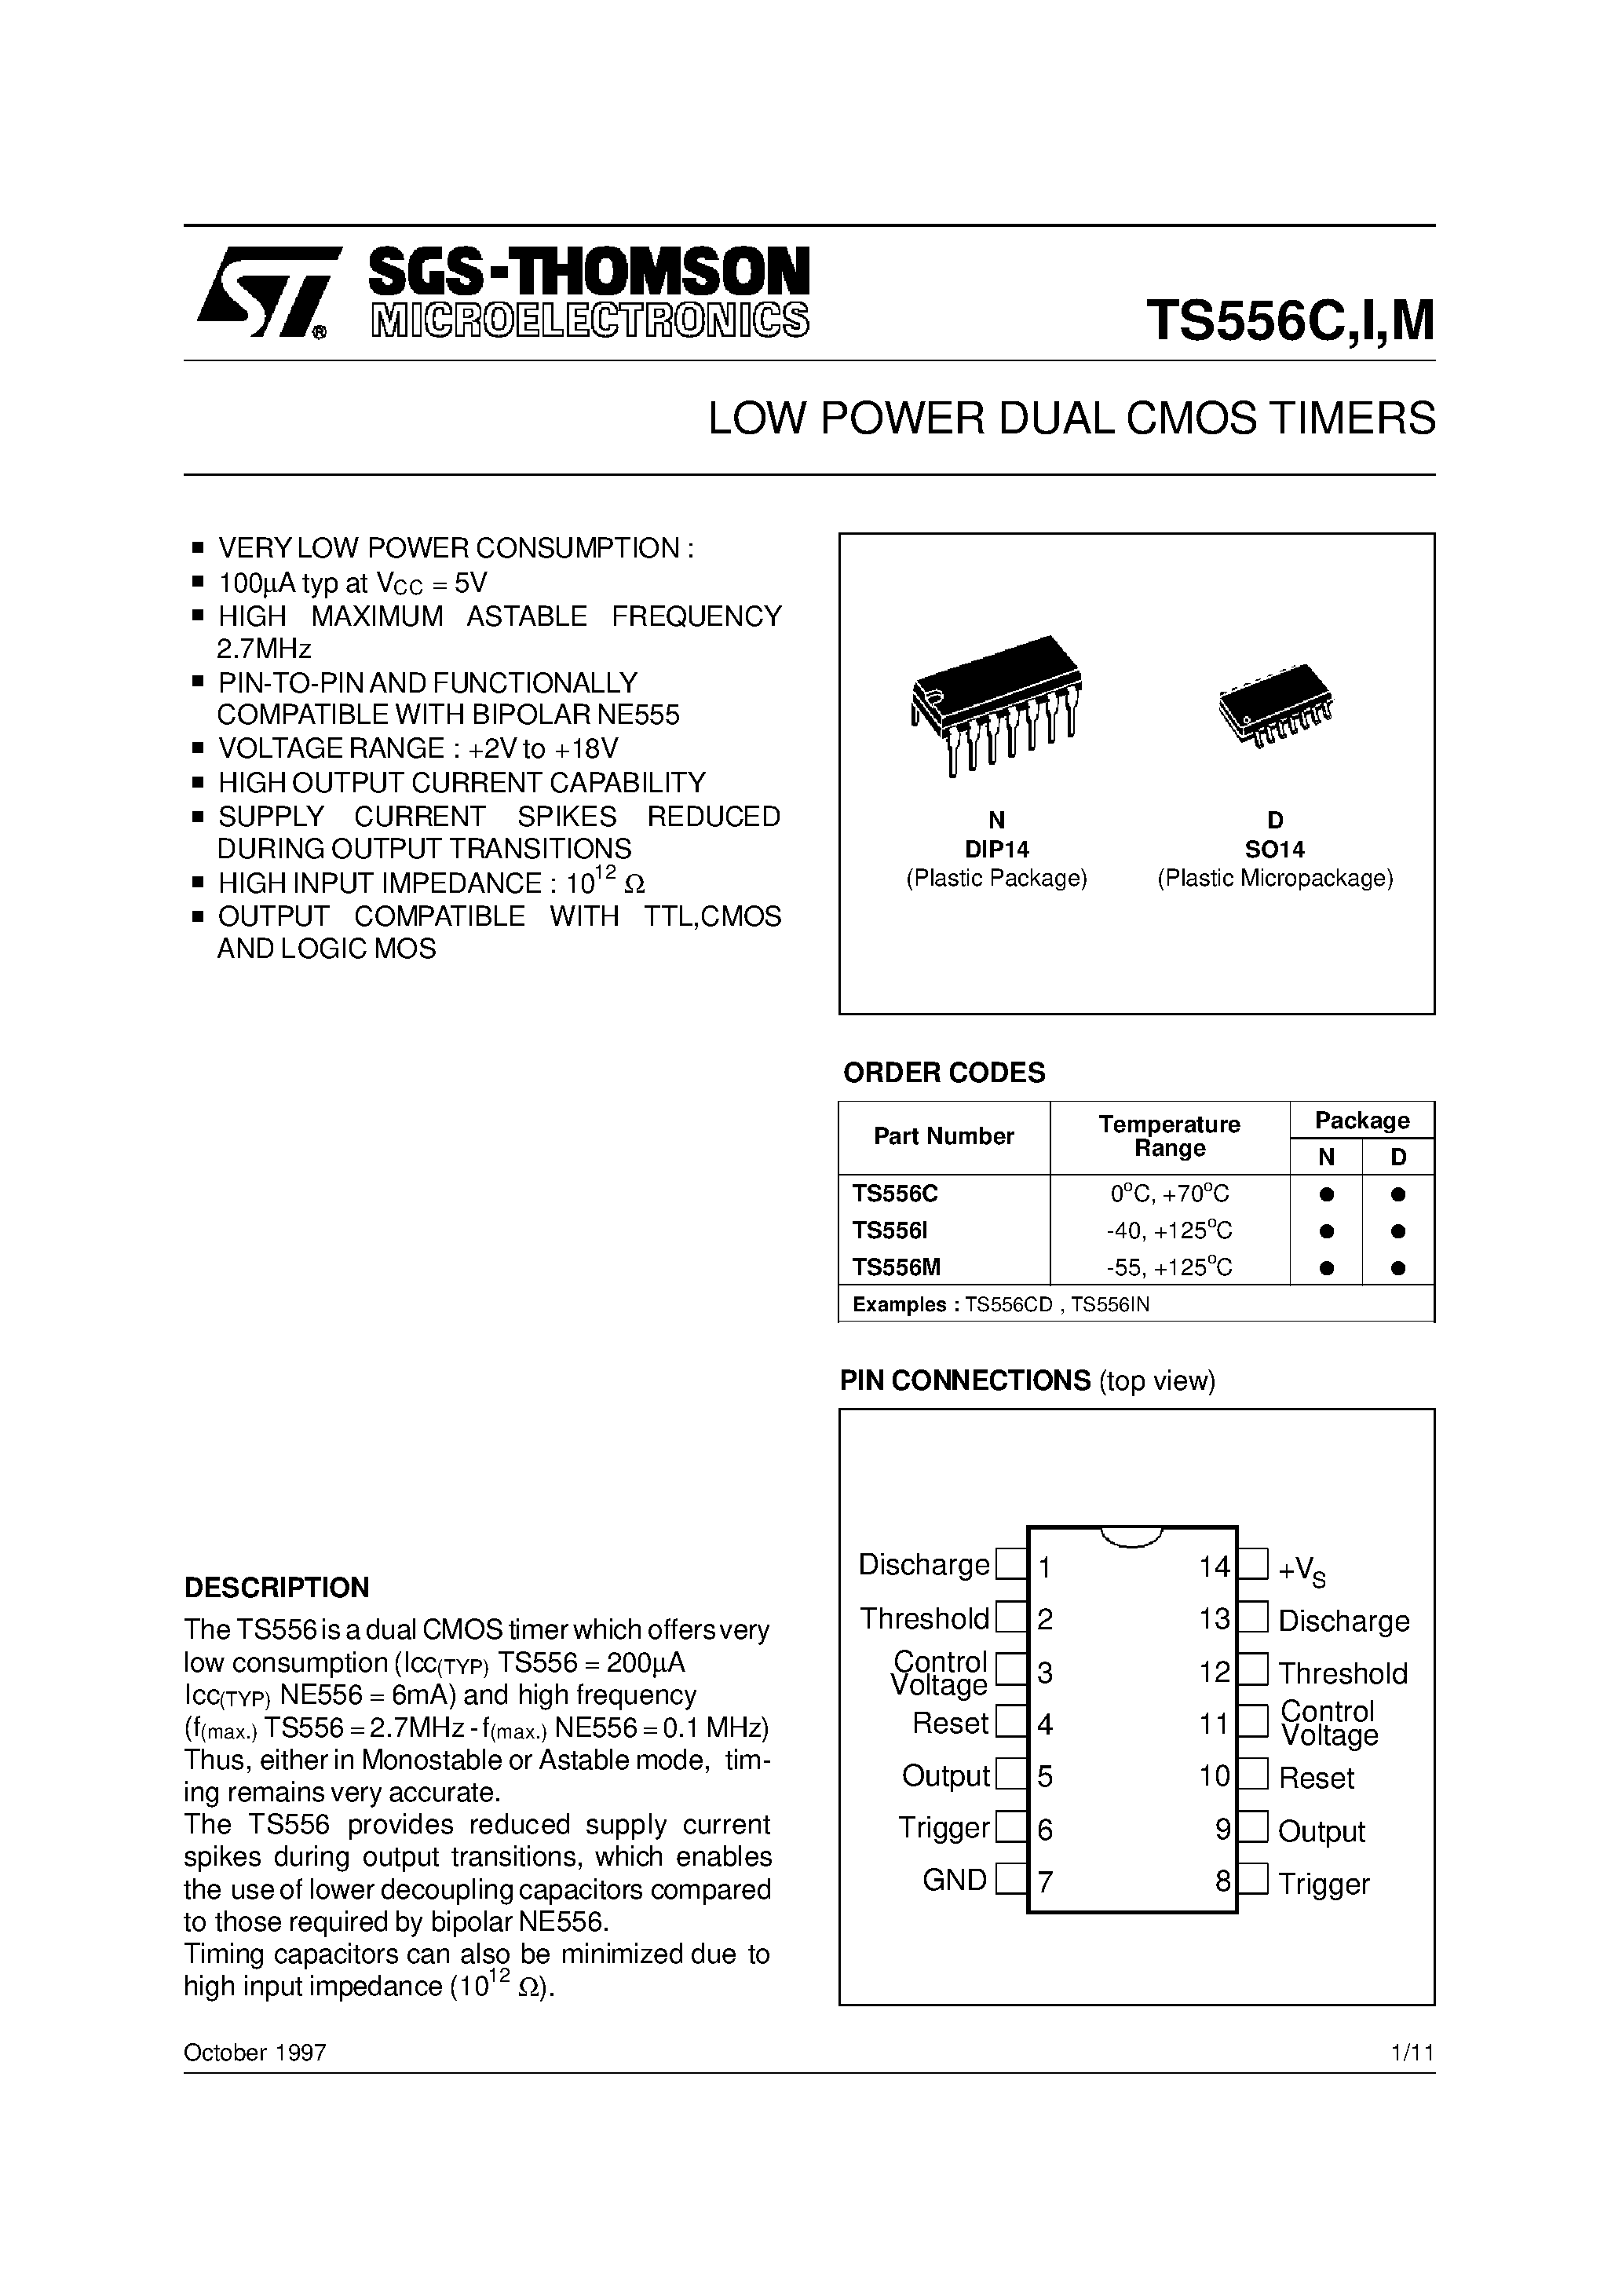 Datasheet TS556MN - LOW POWER DUAL CMOS TIMERS page 1